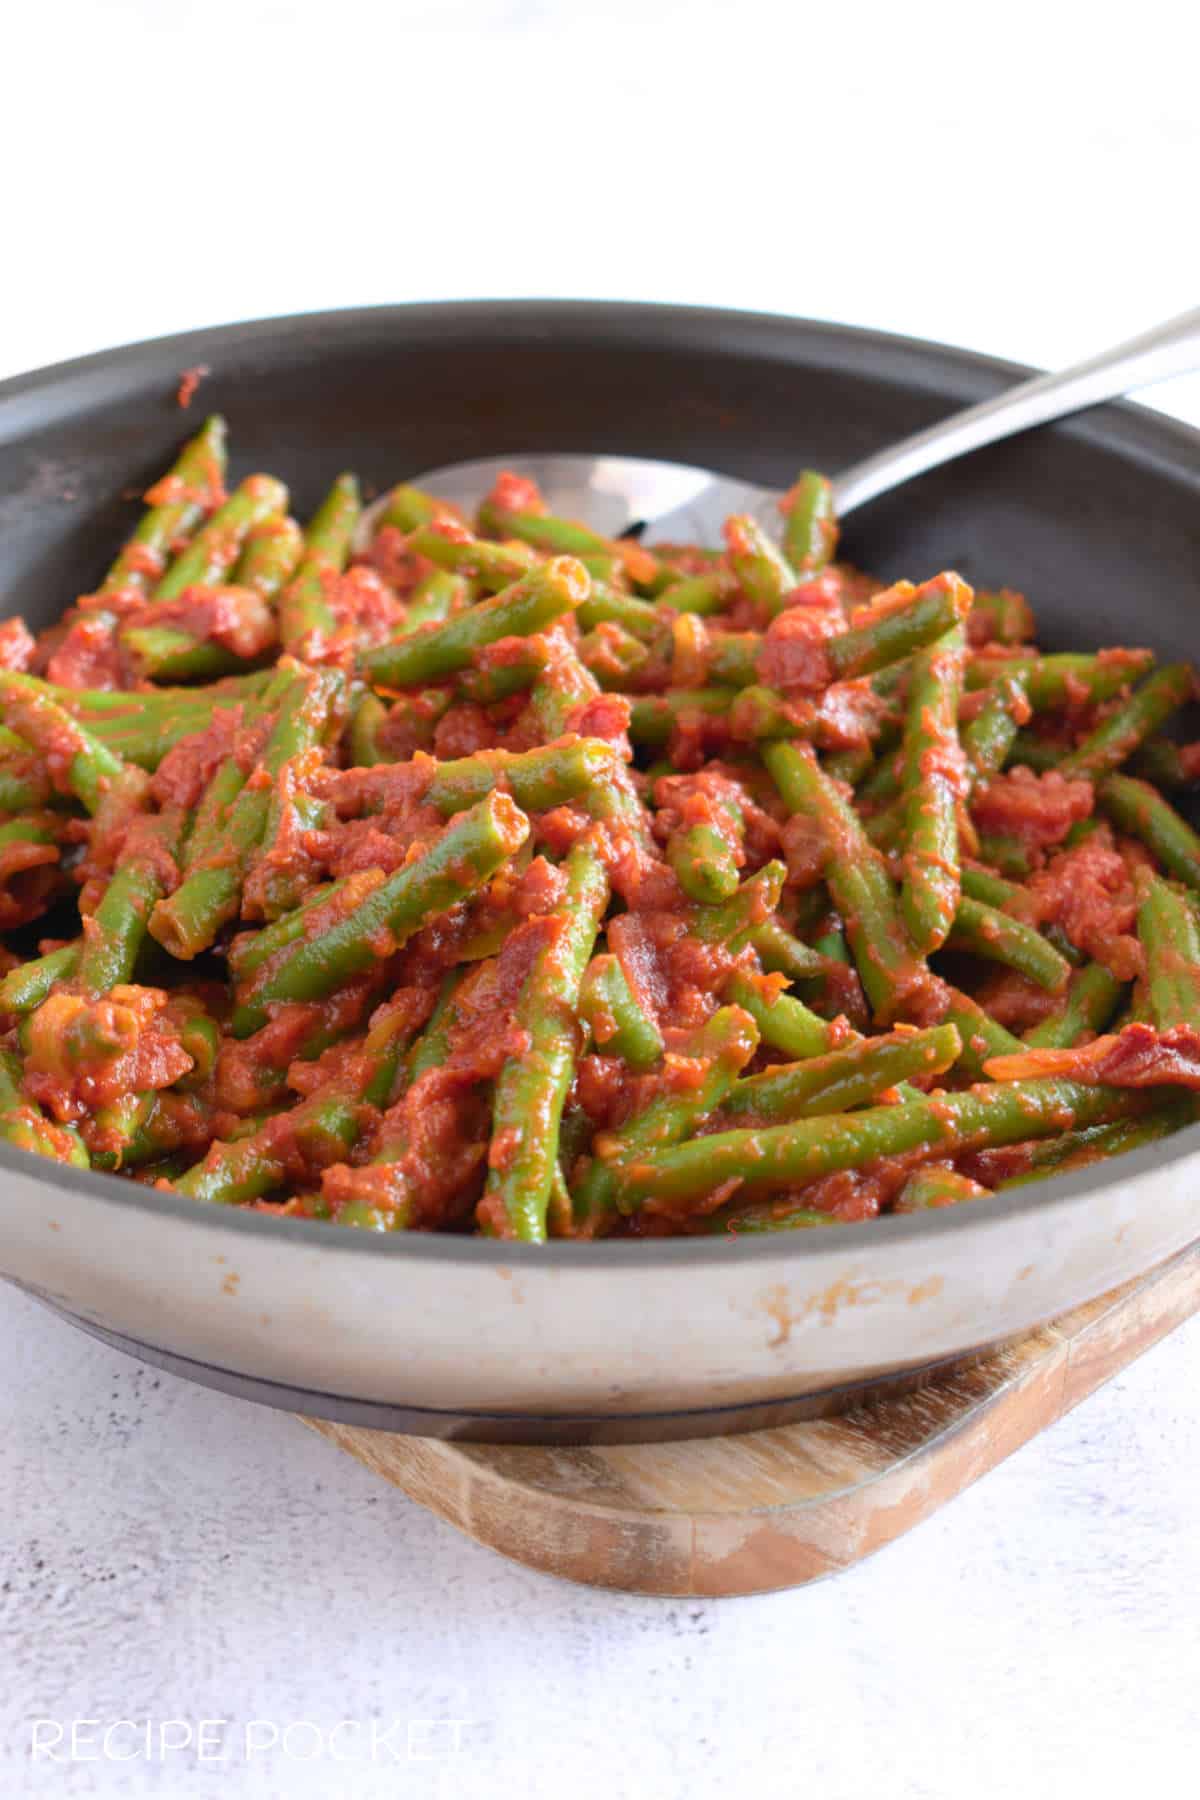 A frying pan filled with cooked green beans in tomato sauce with a serving spoon.